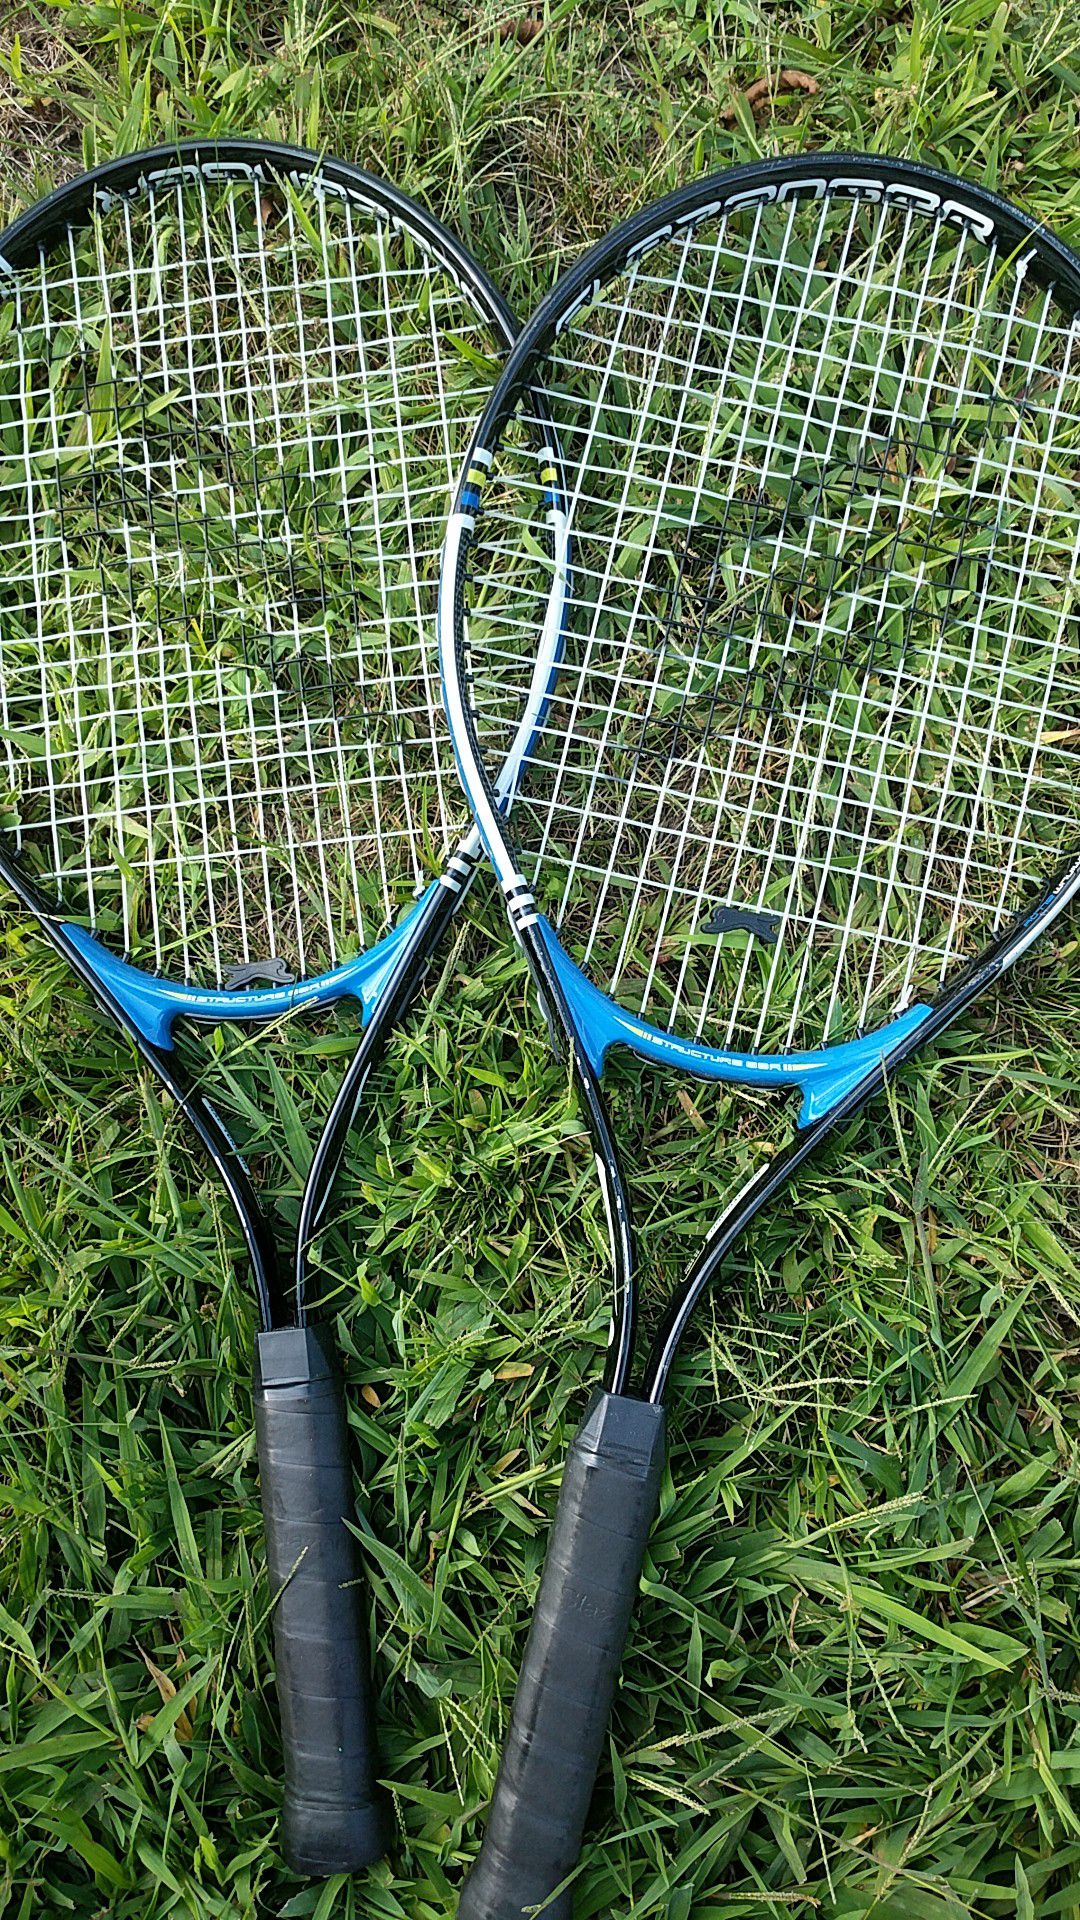 Two brand new tennis rackets